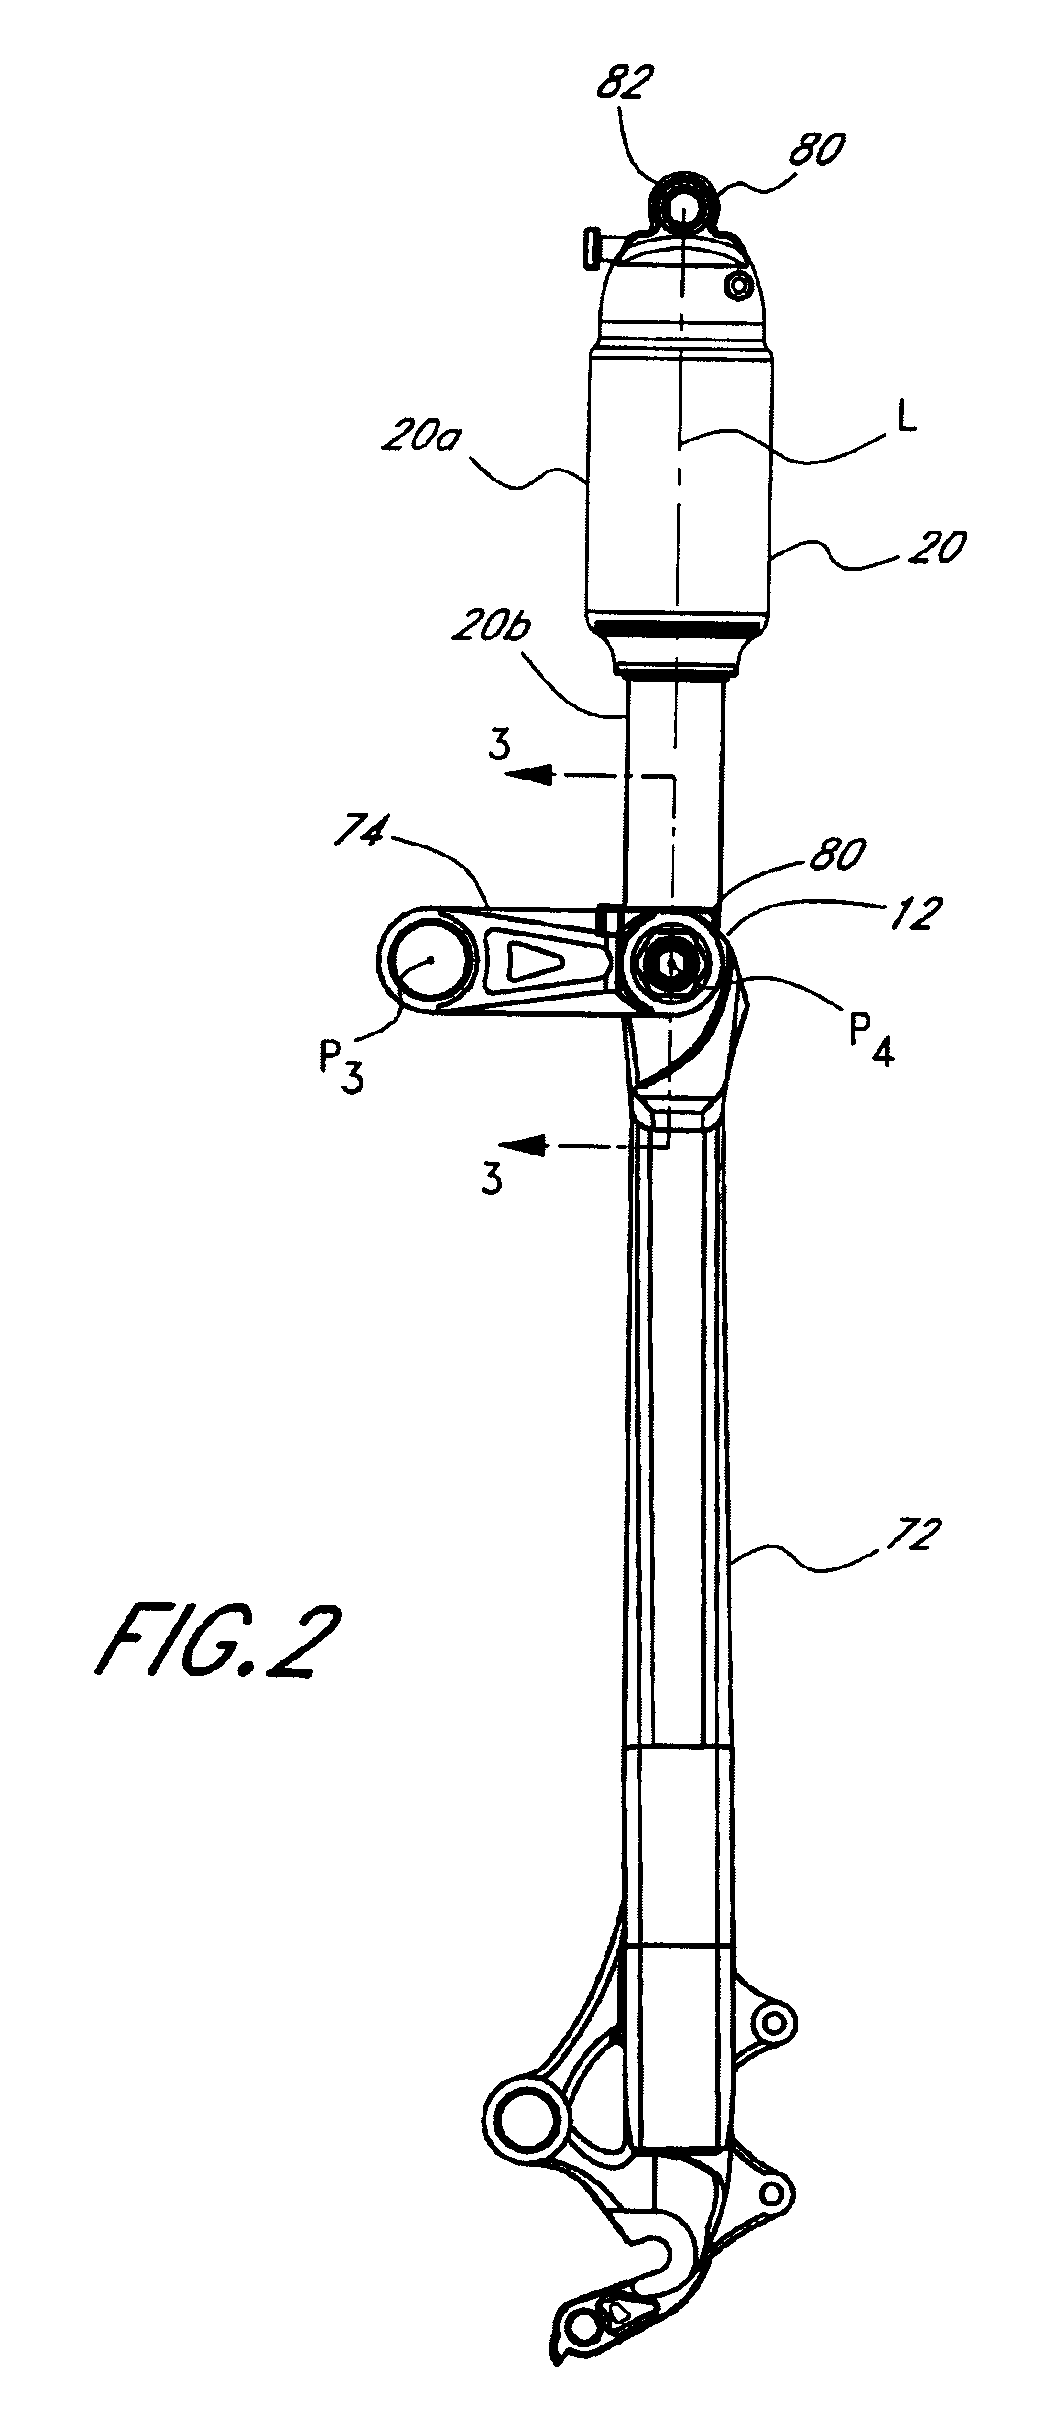 Shock absorber mounting assembly for a bicycle